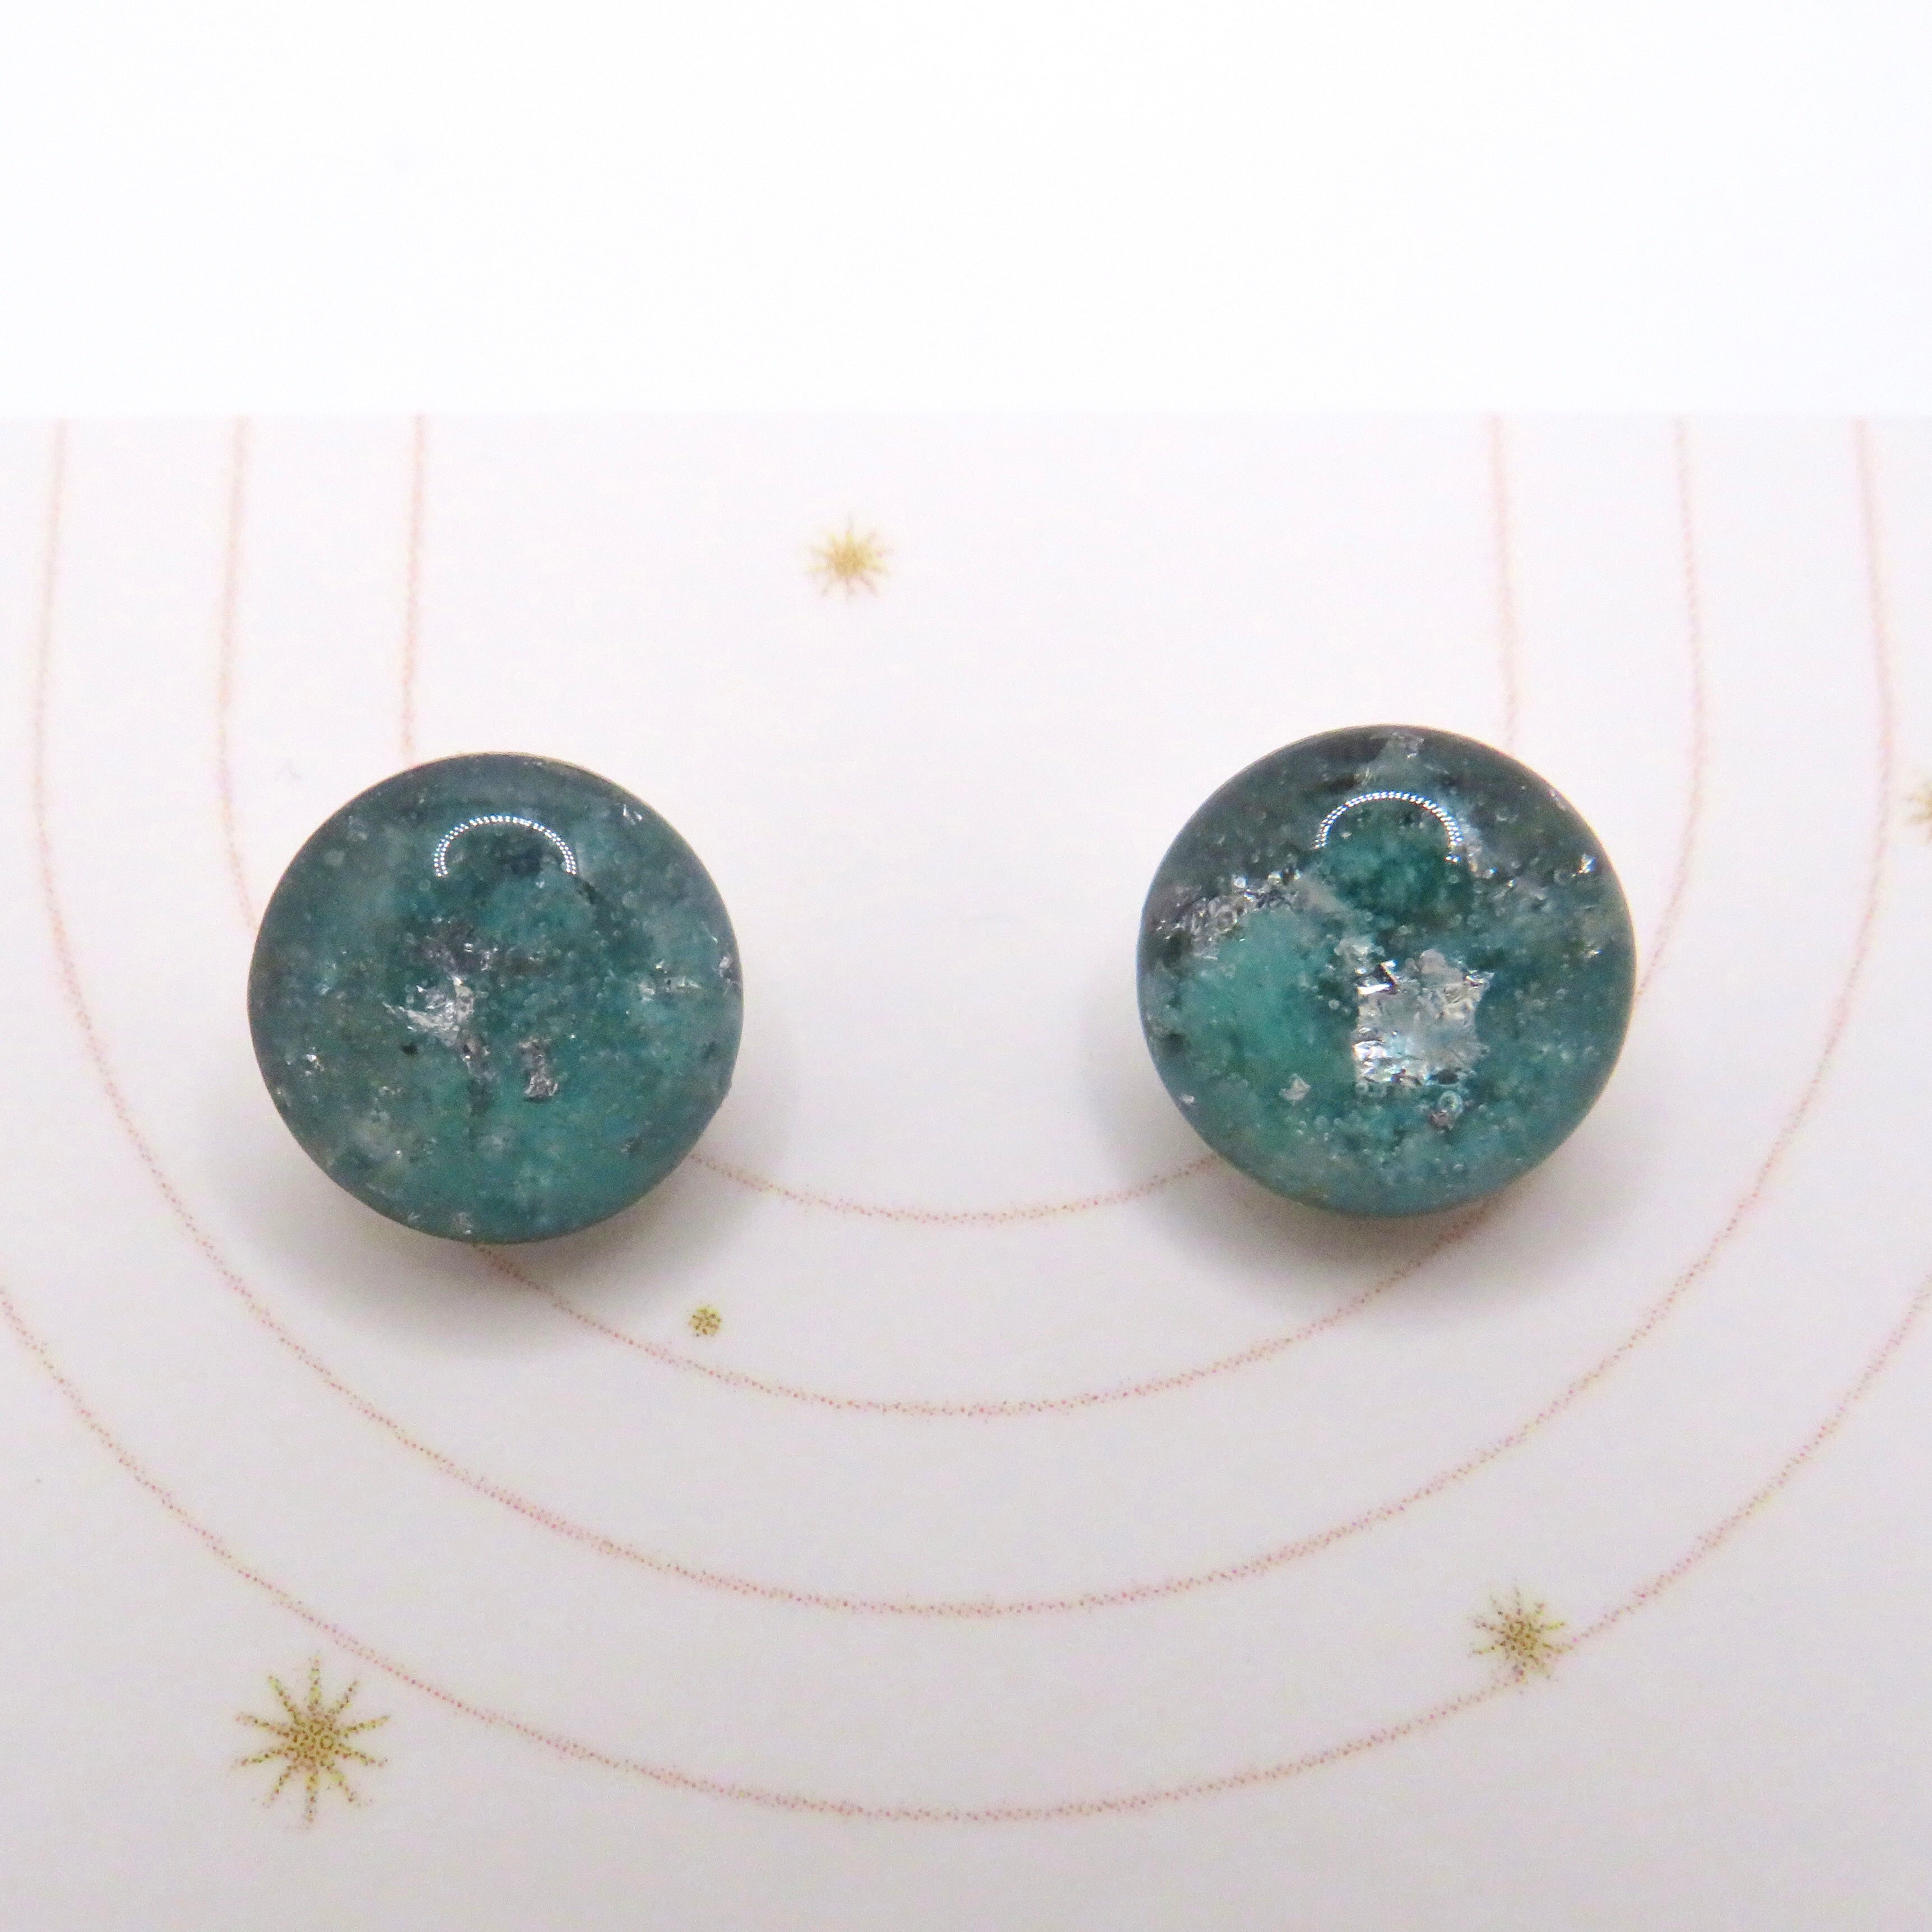 8mm Round Crushed Gemstone Stud Earrings | Assorted Stones